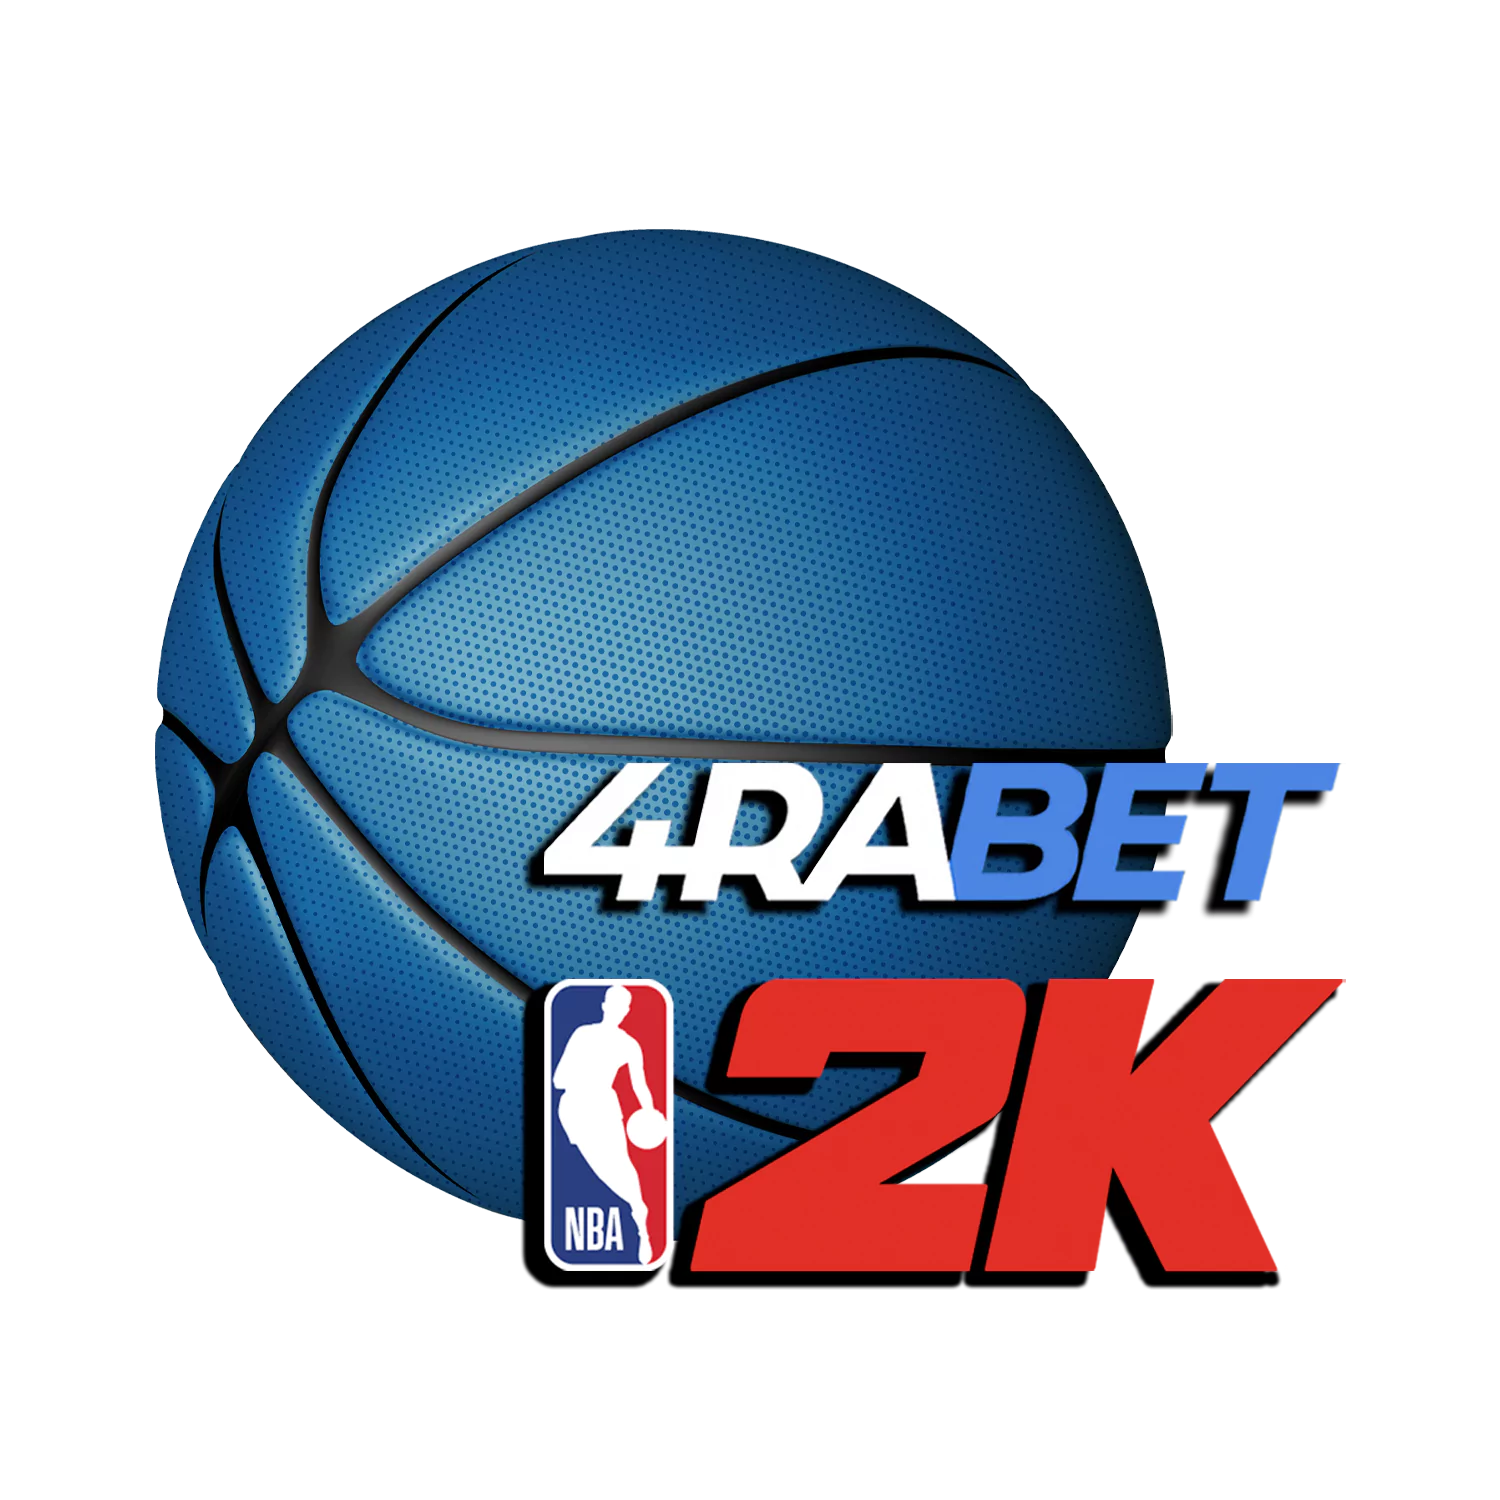 Learn how to bet on the NBA 2K events at 4rabet.